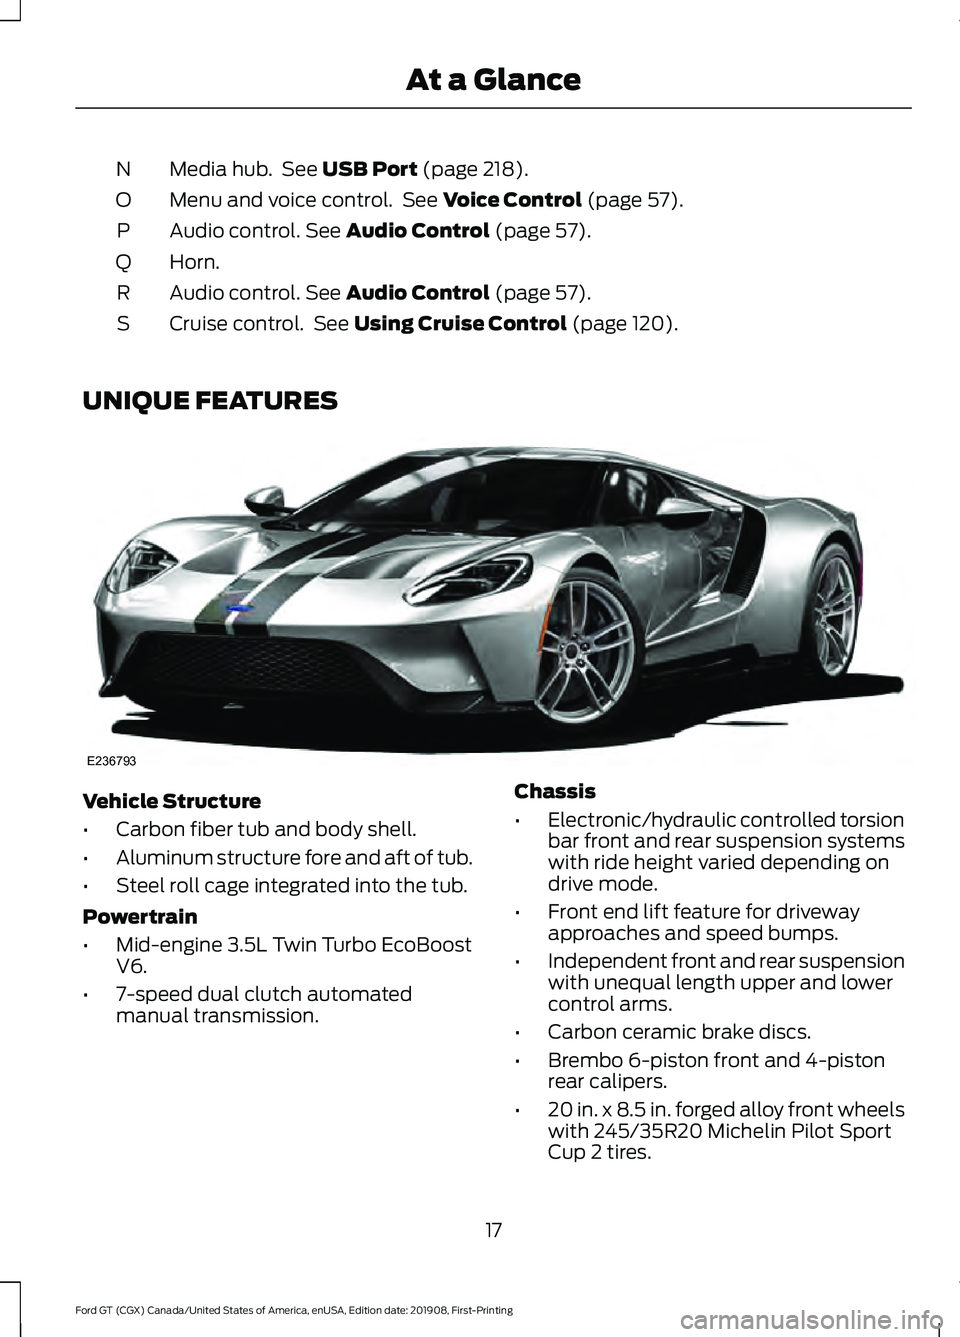 FORD GT 2020  Owners Manual Media hub.  See USB Port (page 218).
N
Menu and voice control.  See 
Voice Control (page 57).
O
Audio control.
 See Audio Control (page 57).
P
Horn.
Q
Audio control.
 See Audio Control (page 57).
R
Cr